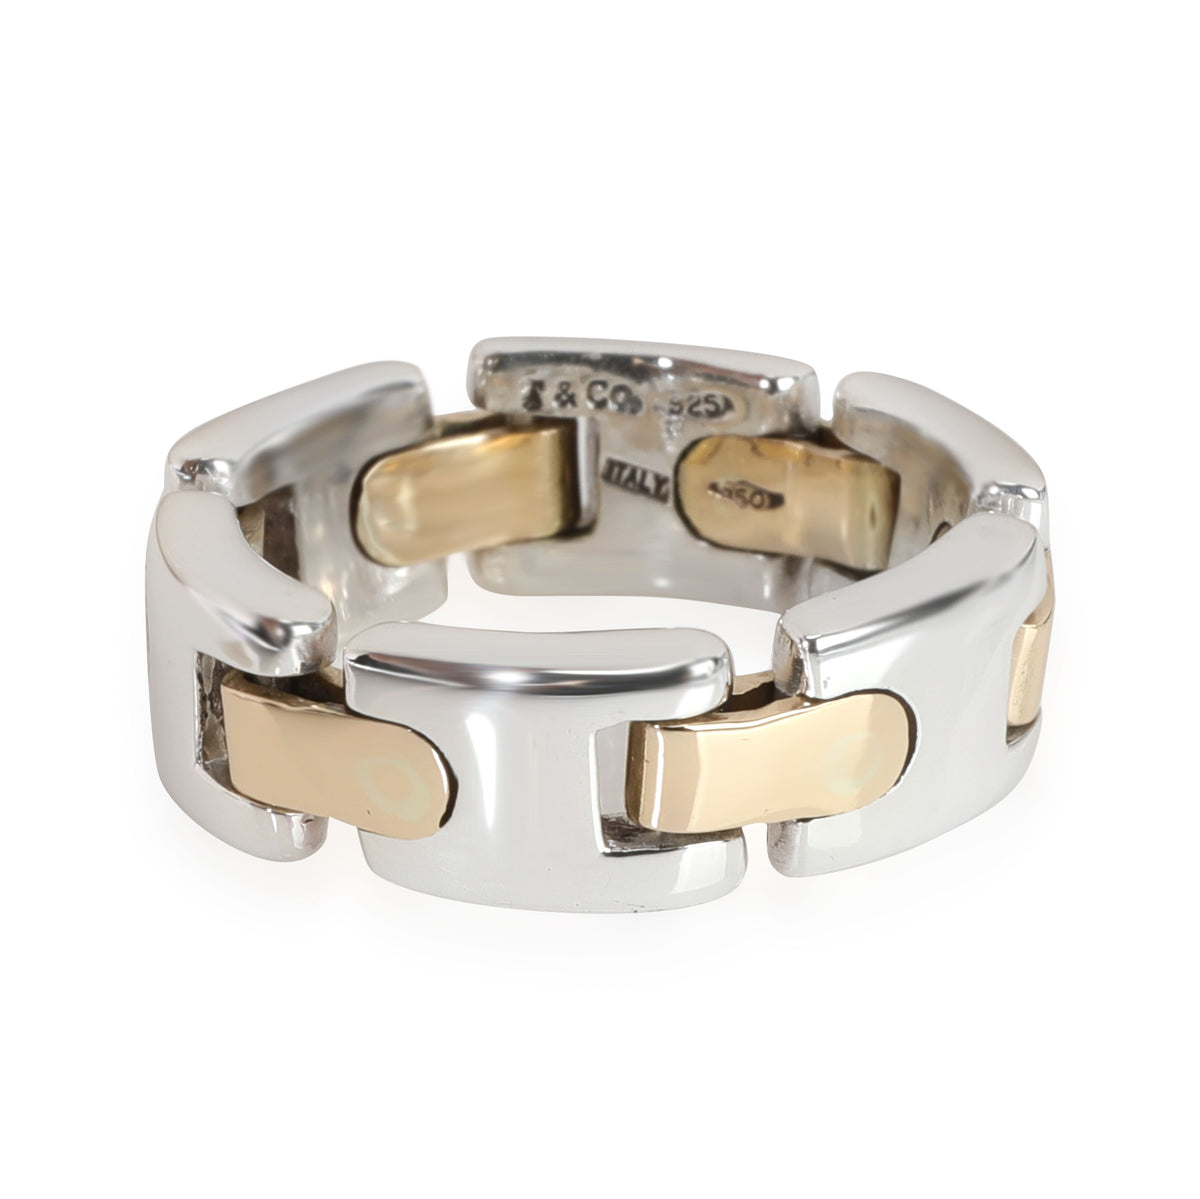 Tiffany & Co. Flexible Link Band in 18K Yellow Gold/Sterling Silver